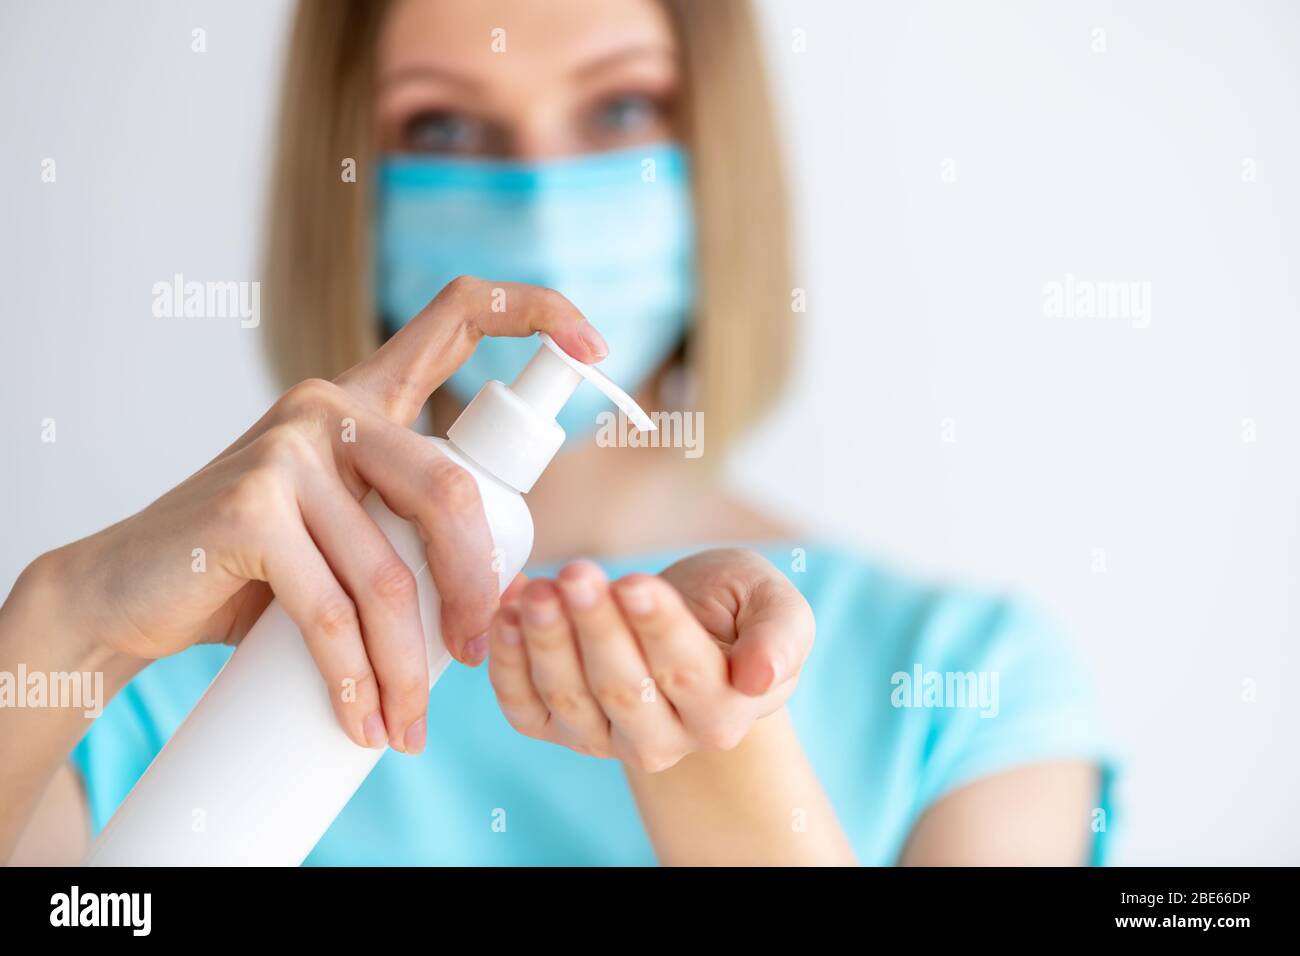 Female doctor or nurse in uniform puts a disinfectant soap on her hands. Disinfection and hand washing. Protection against virus and bacteria Stock Photo